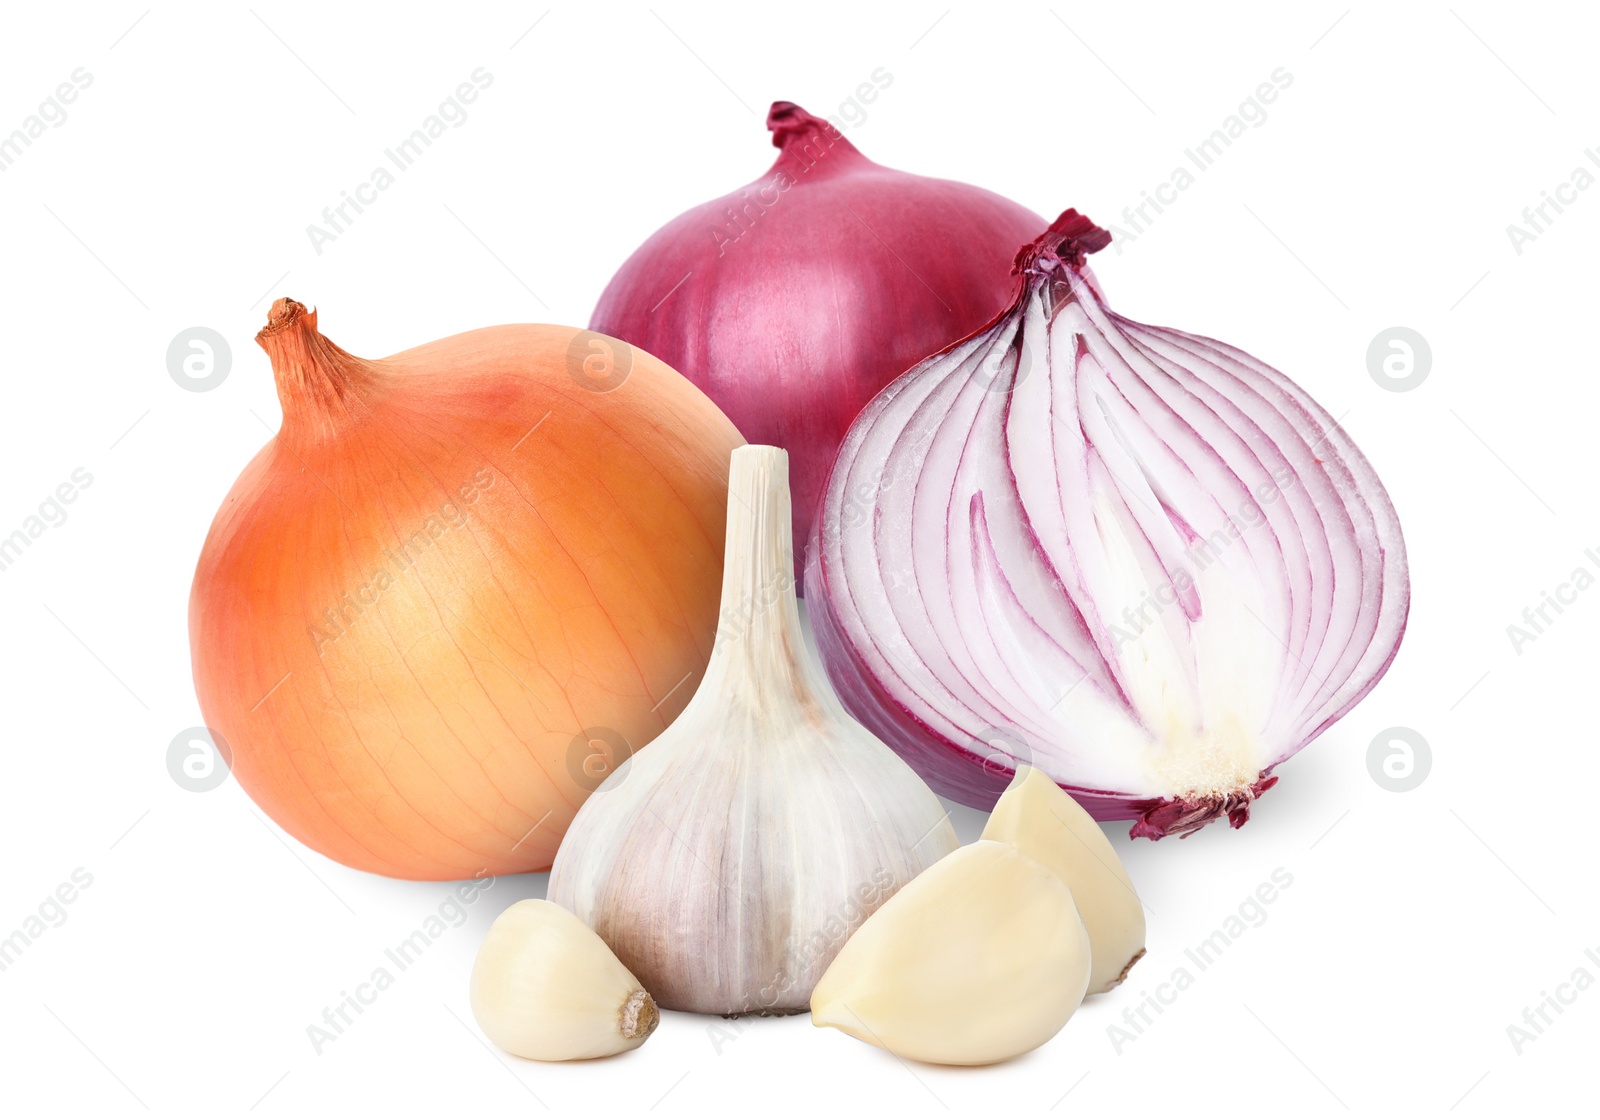 Image of Different onions, garlic bulb and cloves on white background